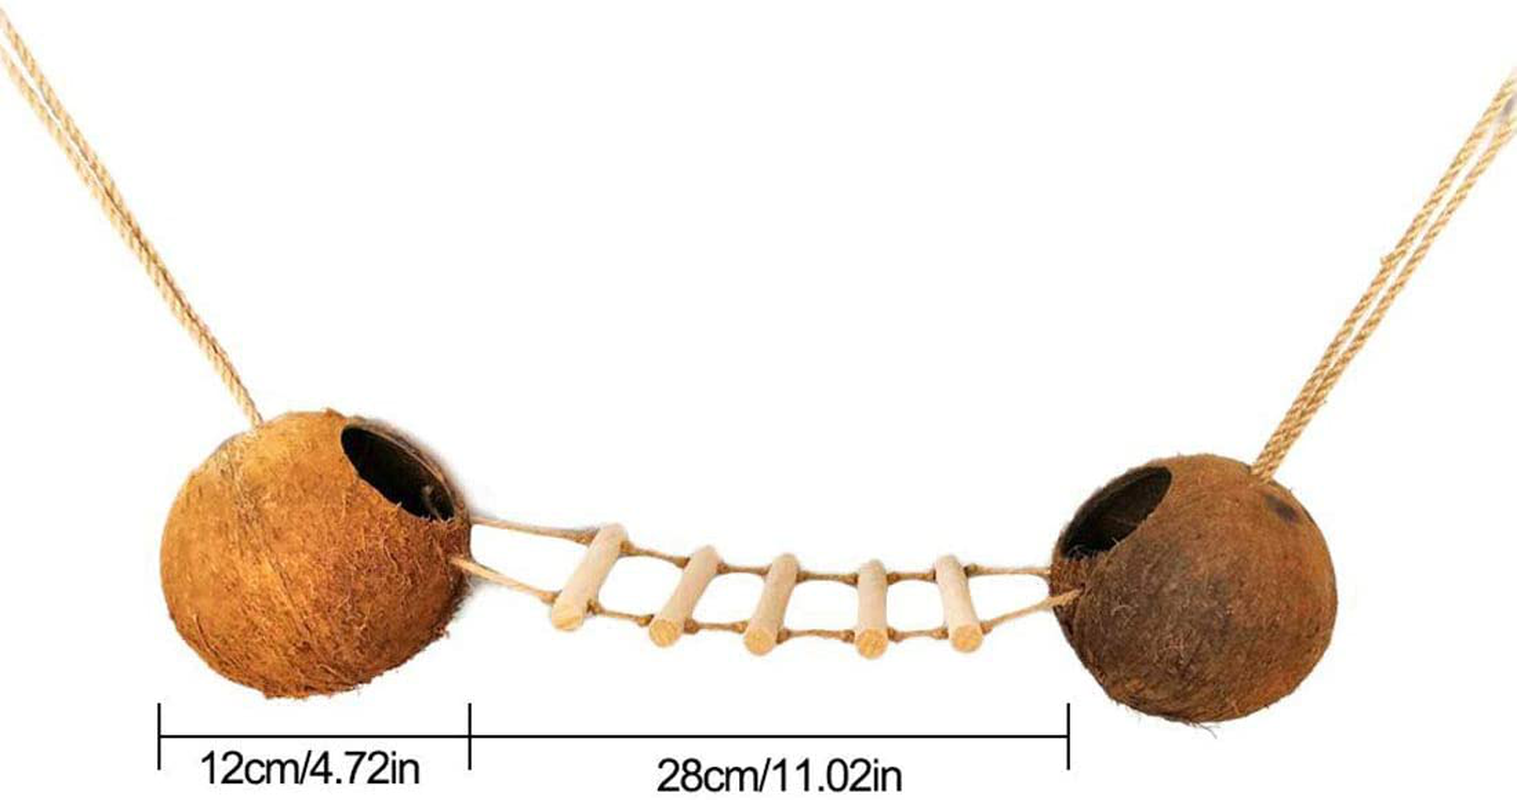 Tfwadmx Natural Coconut Hide with Ladder Perches Hanging Bird House Toy for Cage Parrot Breeding Nest for Gecko Parakeet Lovebird Finch Hamster Animals & Pet Supplies > Pet Supplies > Bird Supplies > Bird Cage Accessories Tfwadmx   